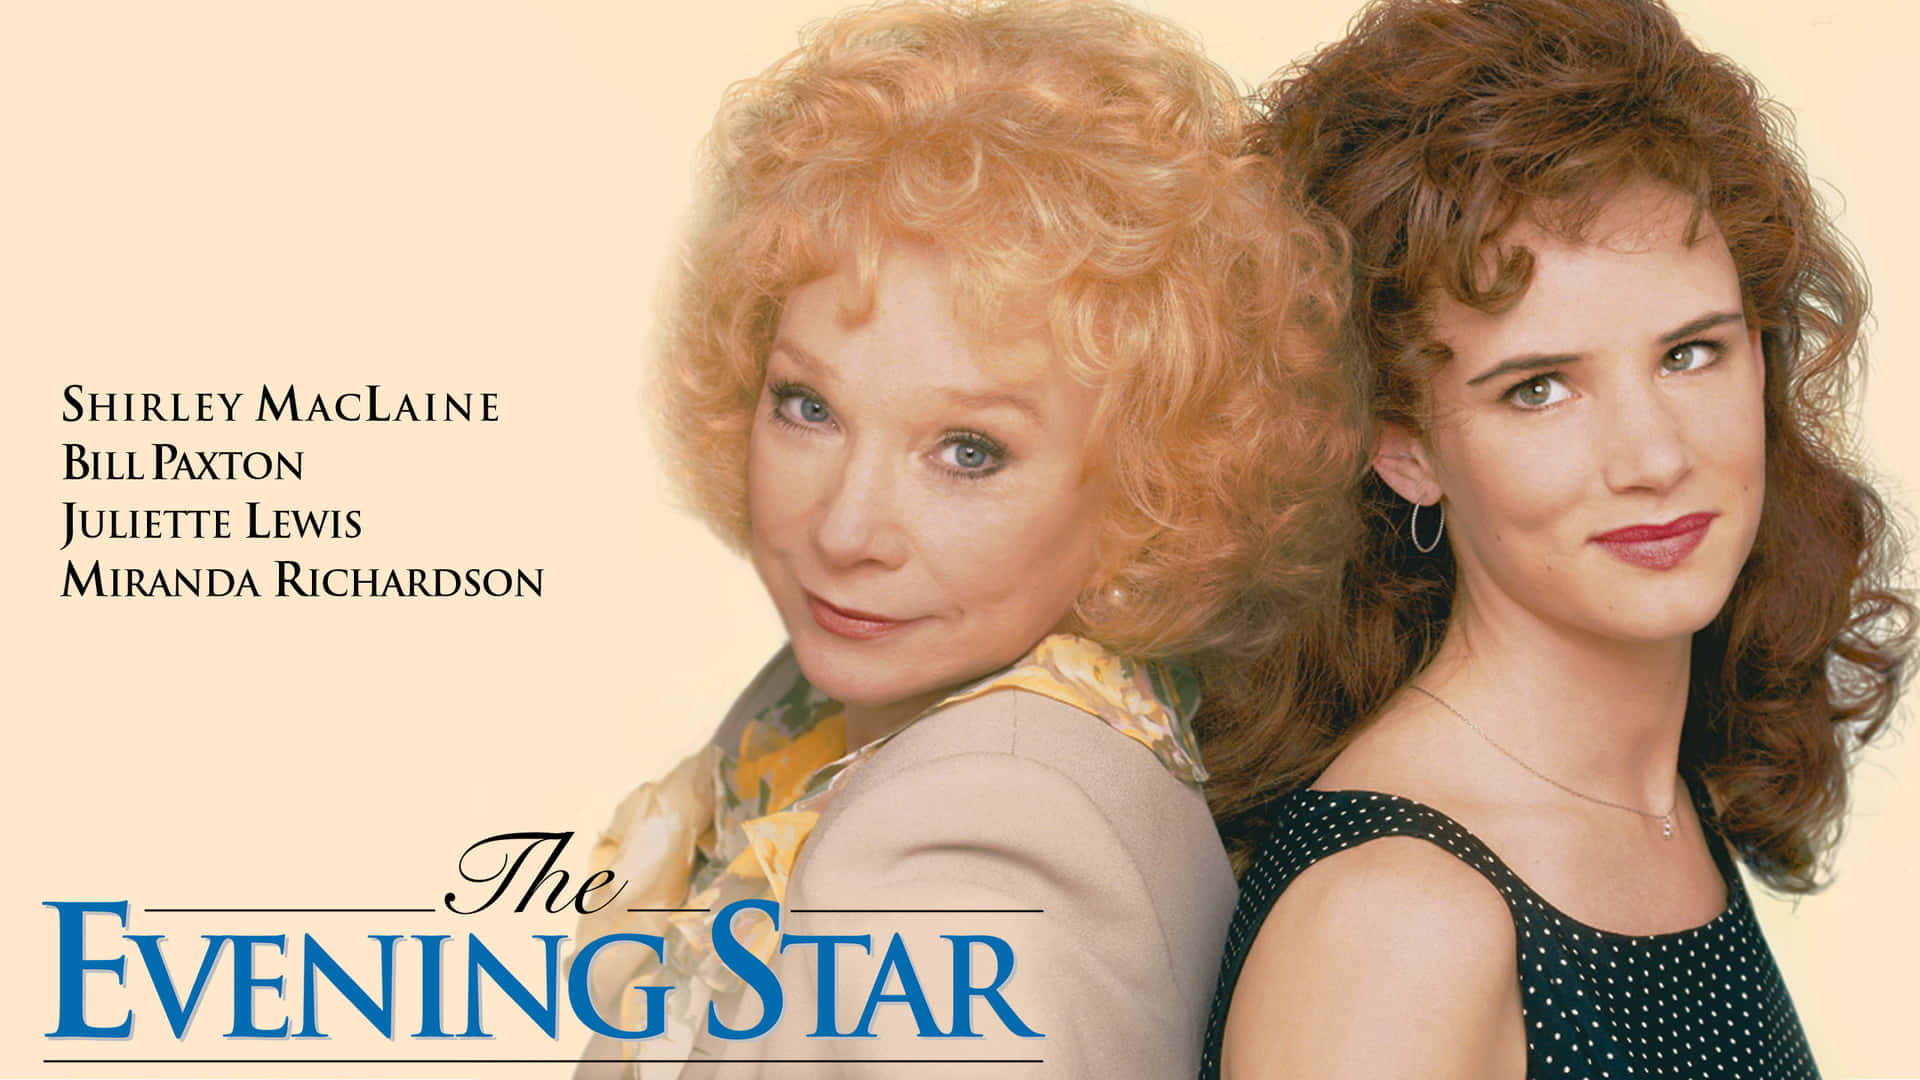 Shirley Maclaine Juliette Lewis The Evening Star Background